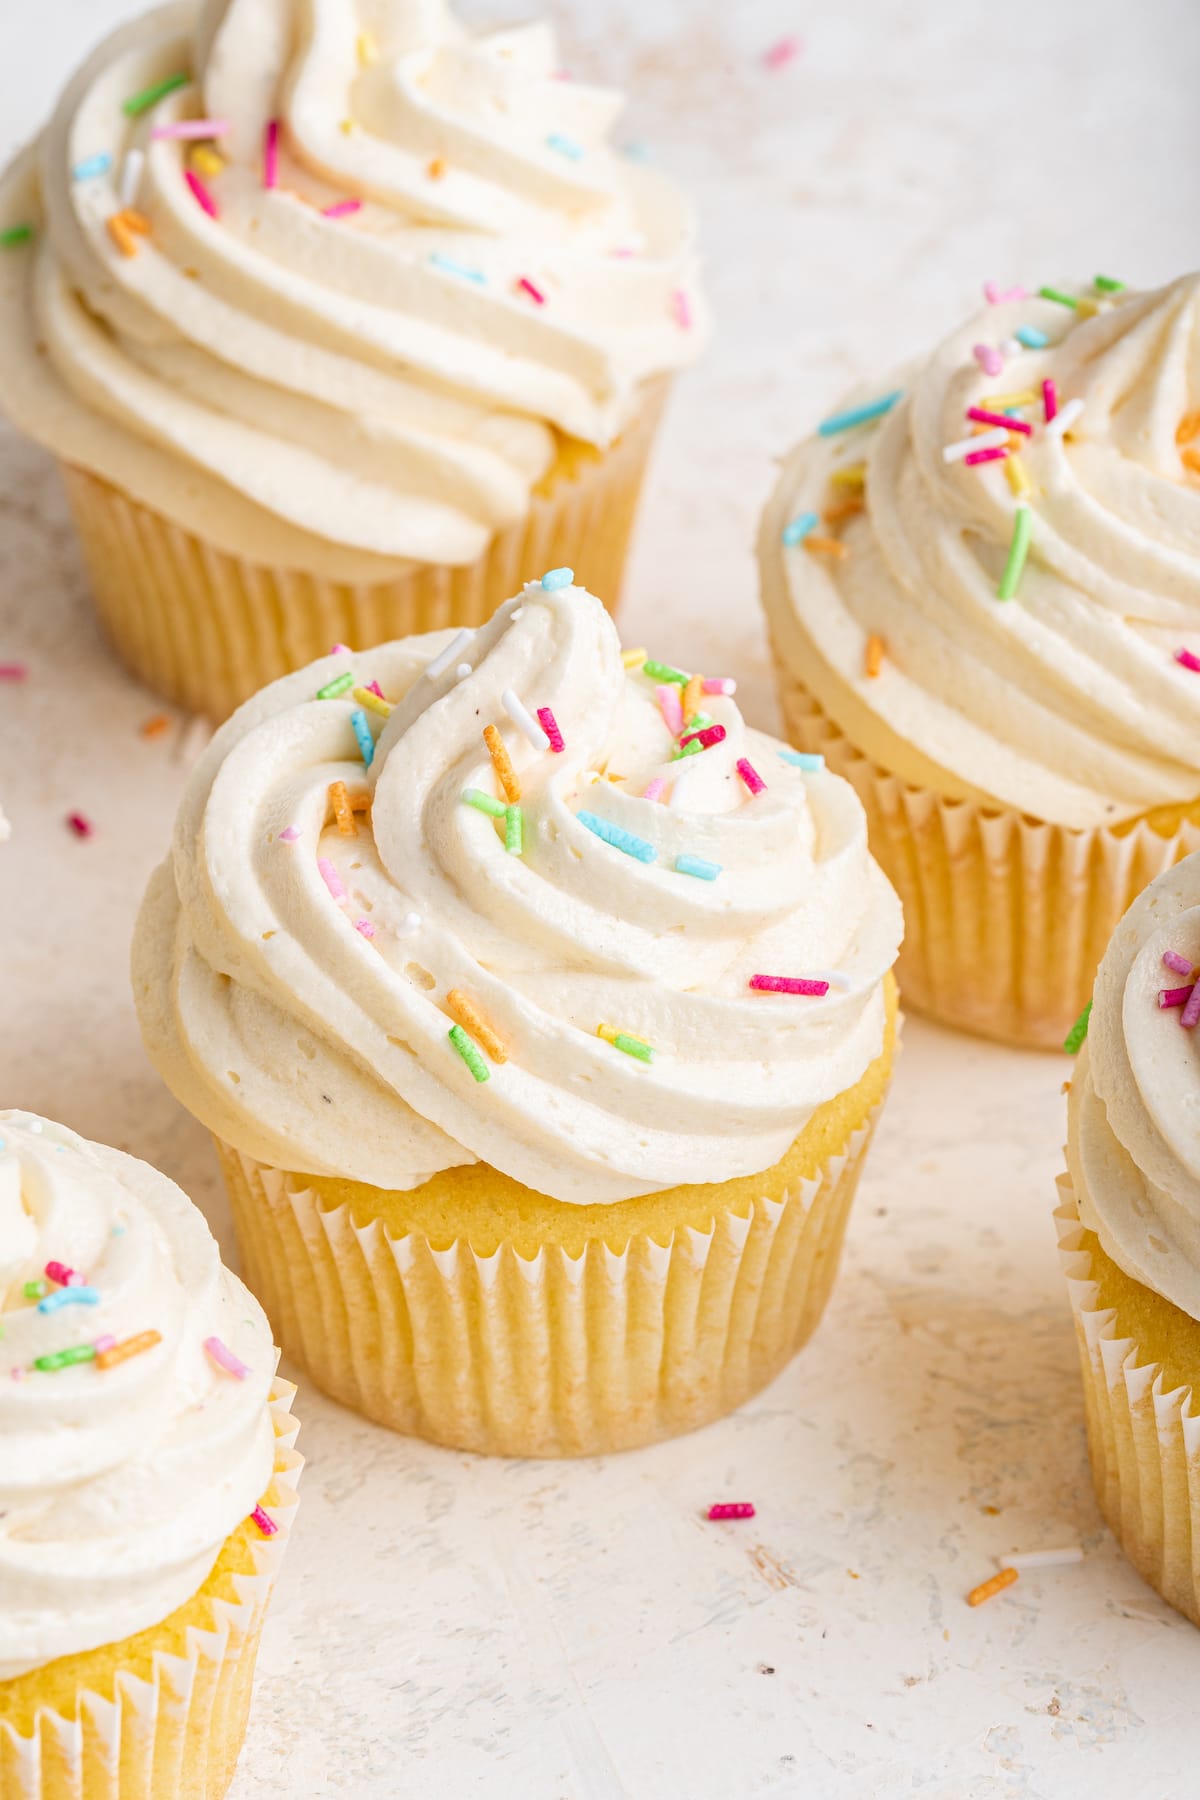 Multiple cupcakes with vanilla buttercream frosting and sprinkles.